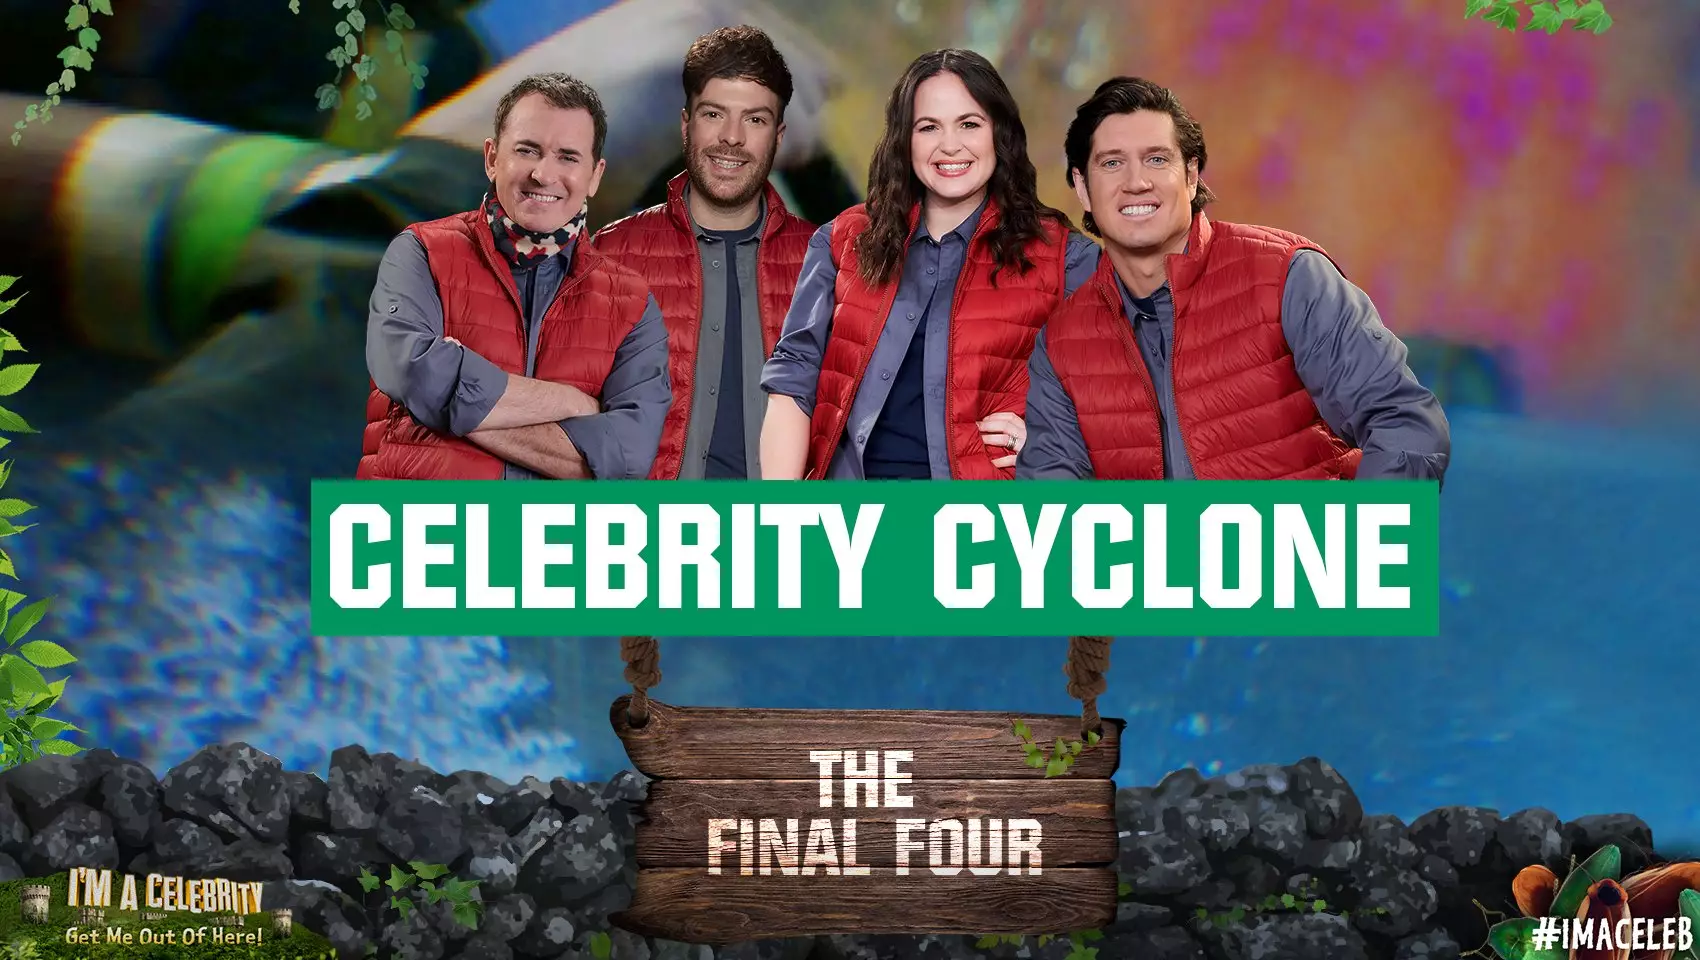 Celebrity Cyclone is always the highlight of the series (